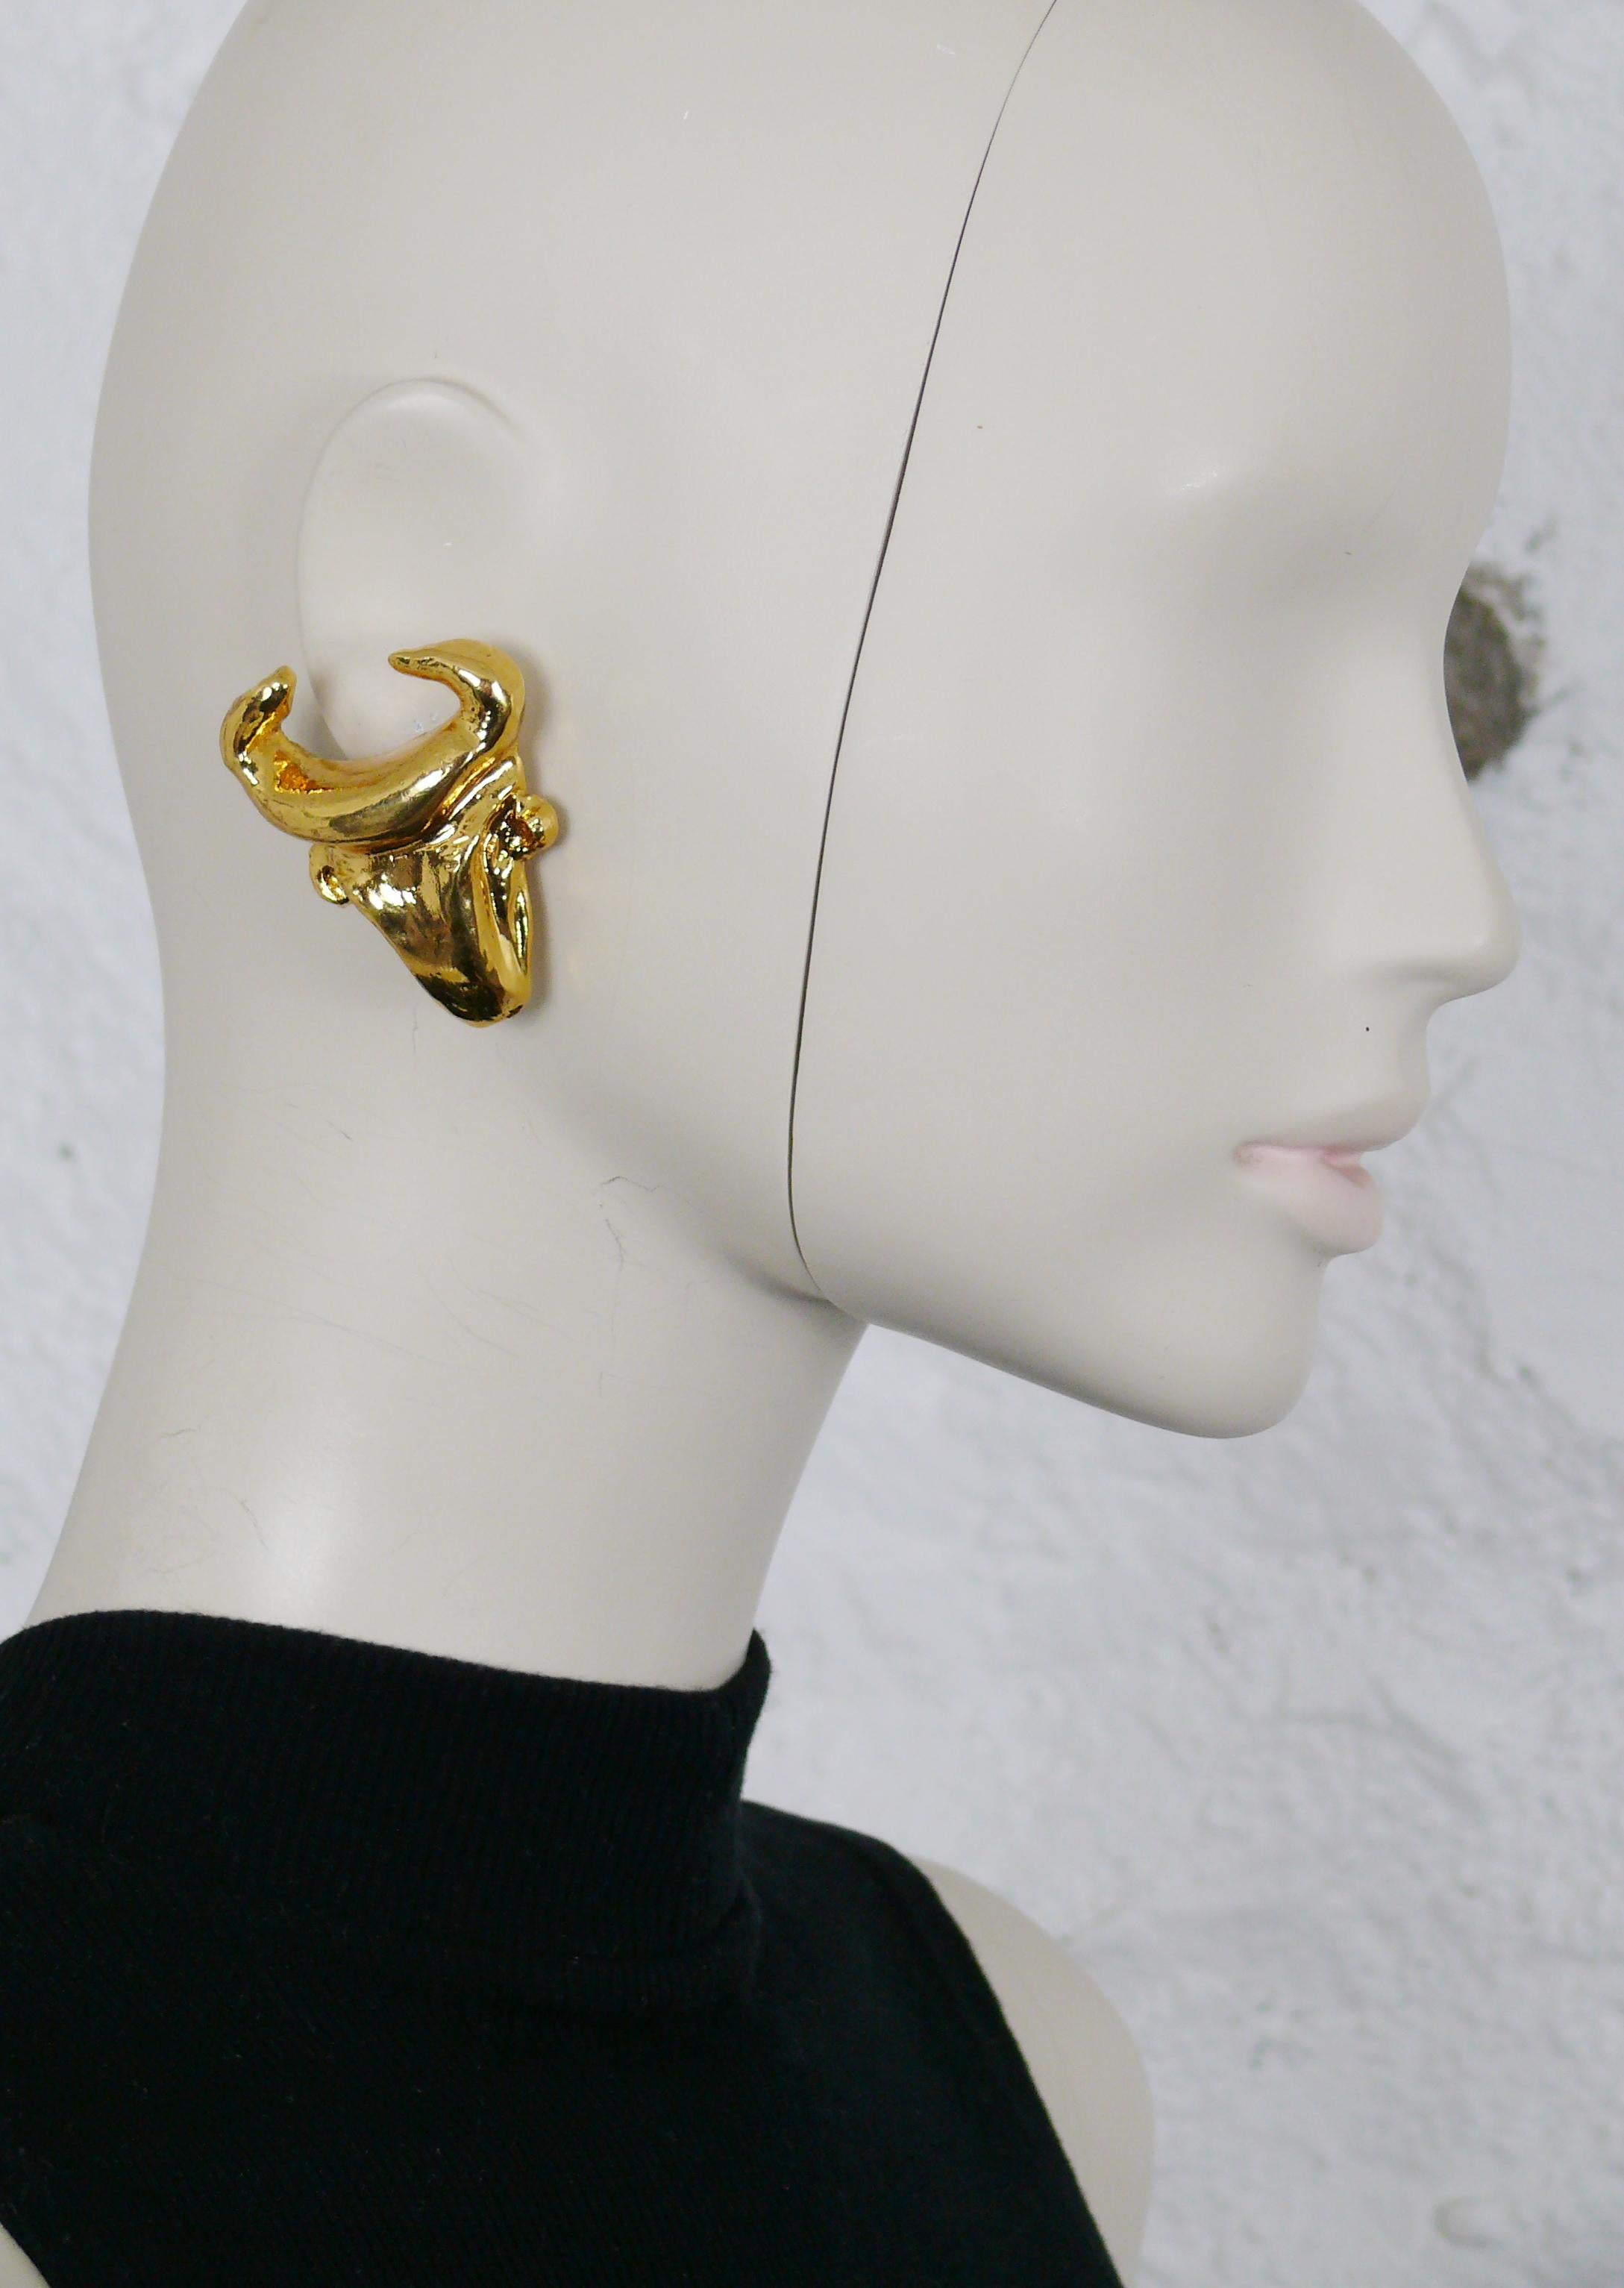 CHRISTIAN LACROIX vintage gold toned resin clip-on earrings featuring a bull head.

Marked CHRISTIAN LACROIX CL Made in France.

Indicative measurements : max. height approx. 5 cm (1.97 inches) / max. width approx. 4 cm (1.57 inches).

Comes with a